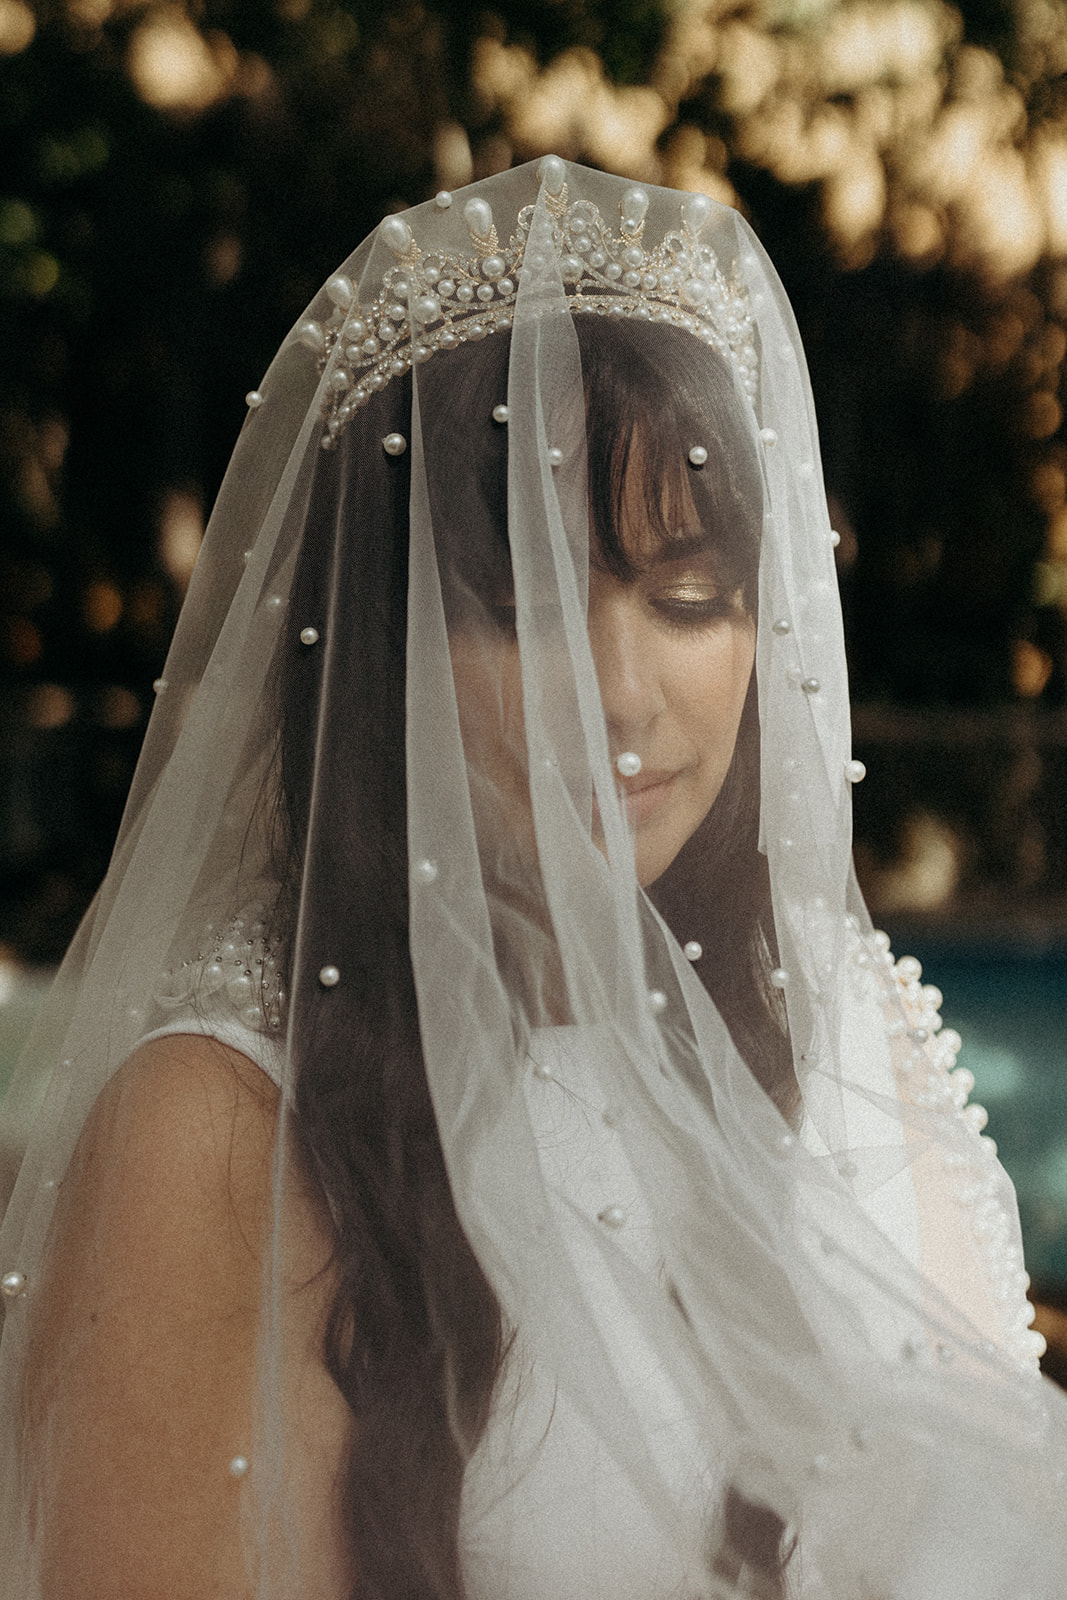 bride style wearing a crown and beaded veil